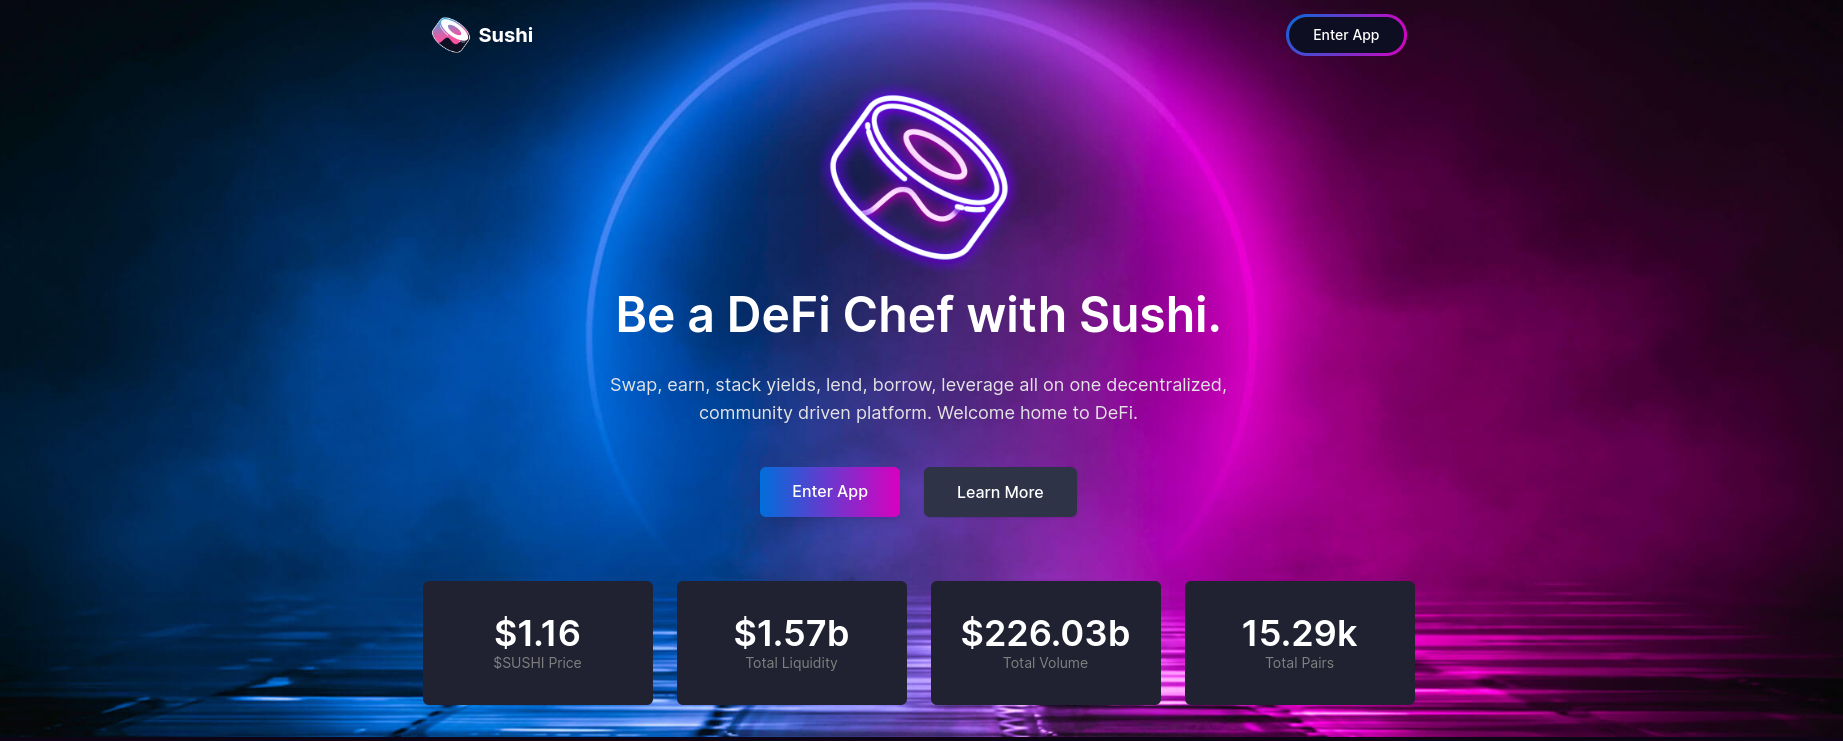 Sushi.com is one of the prominent DeFi places in web3